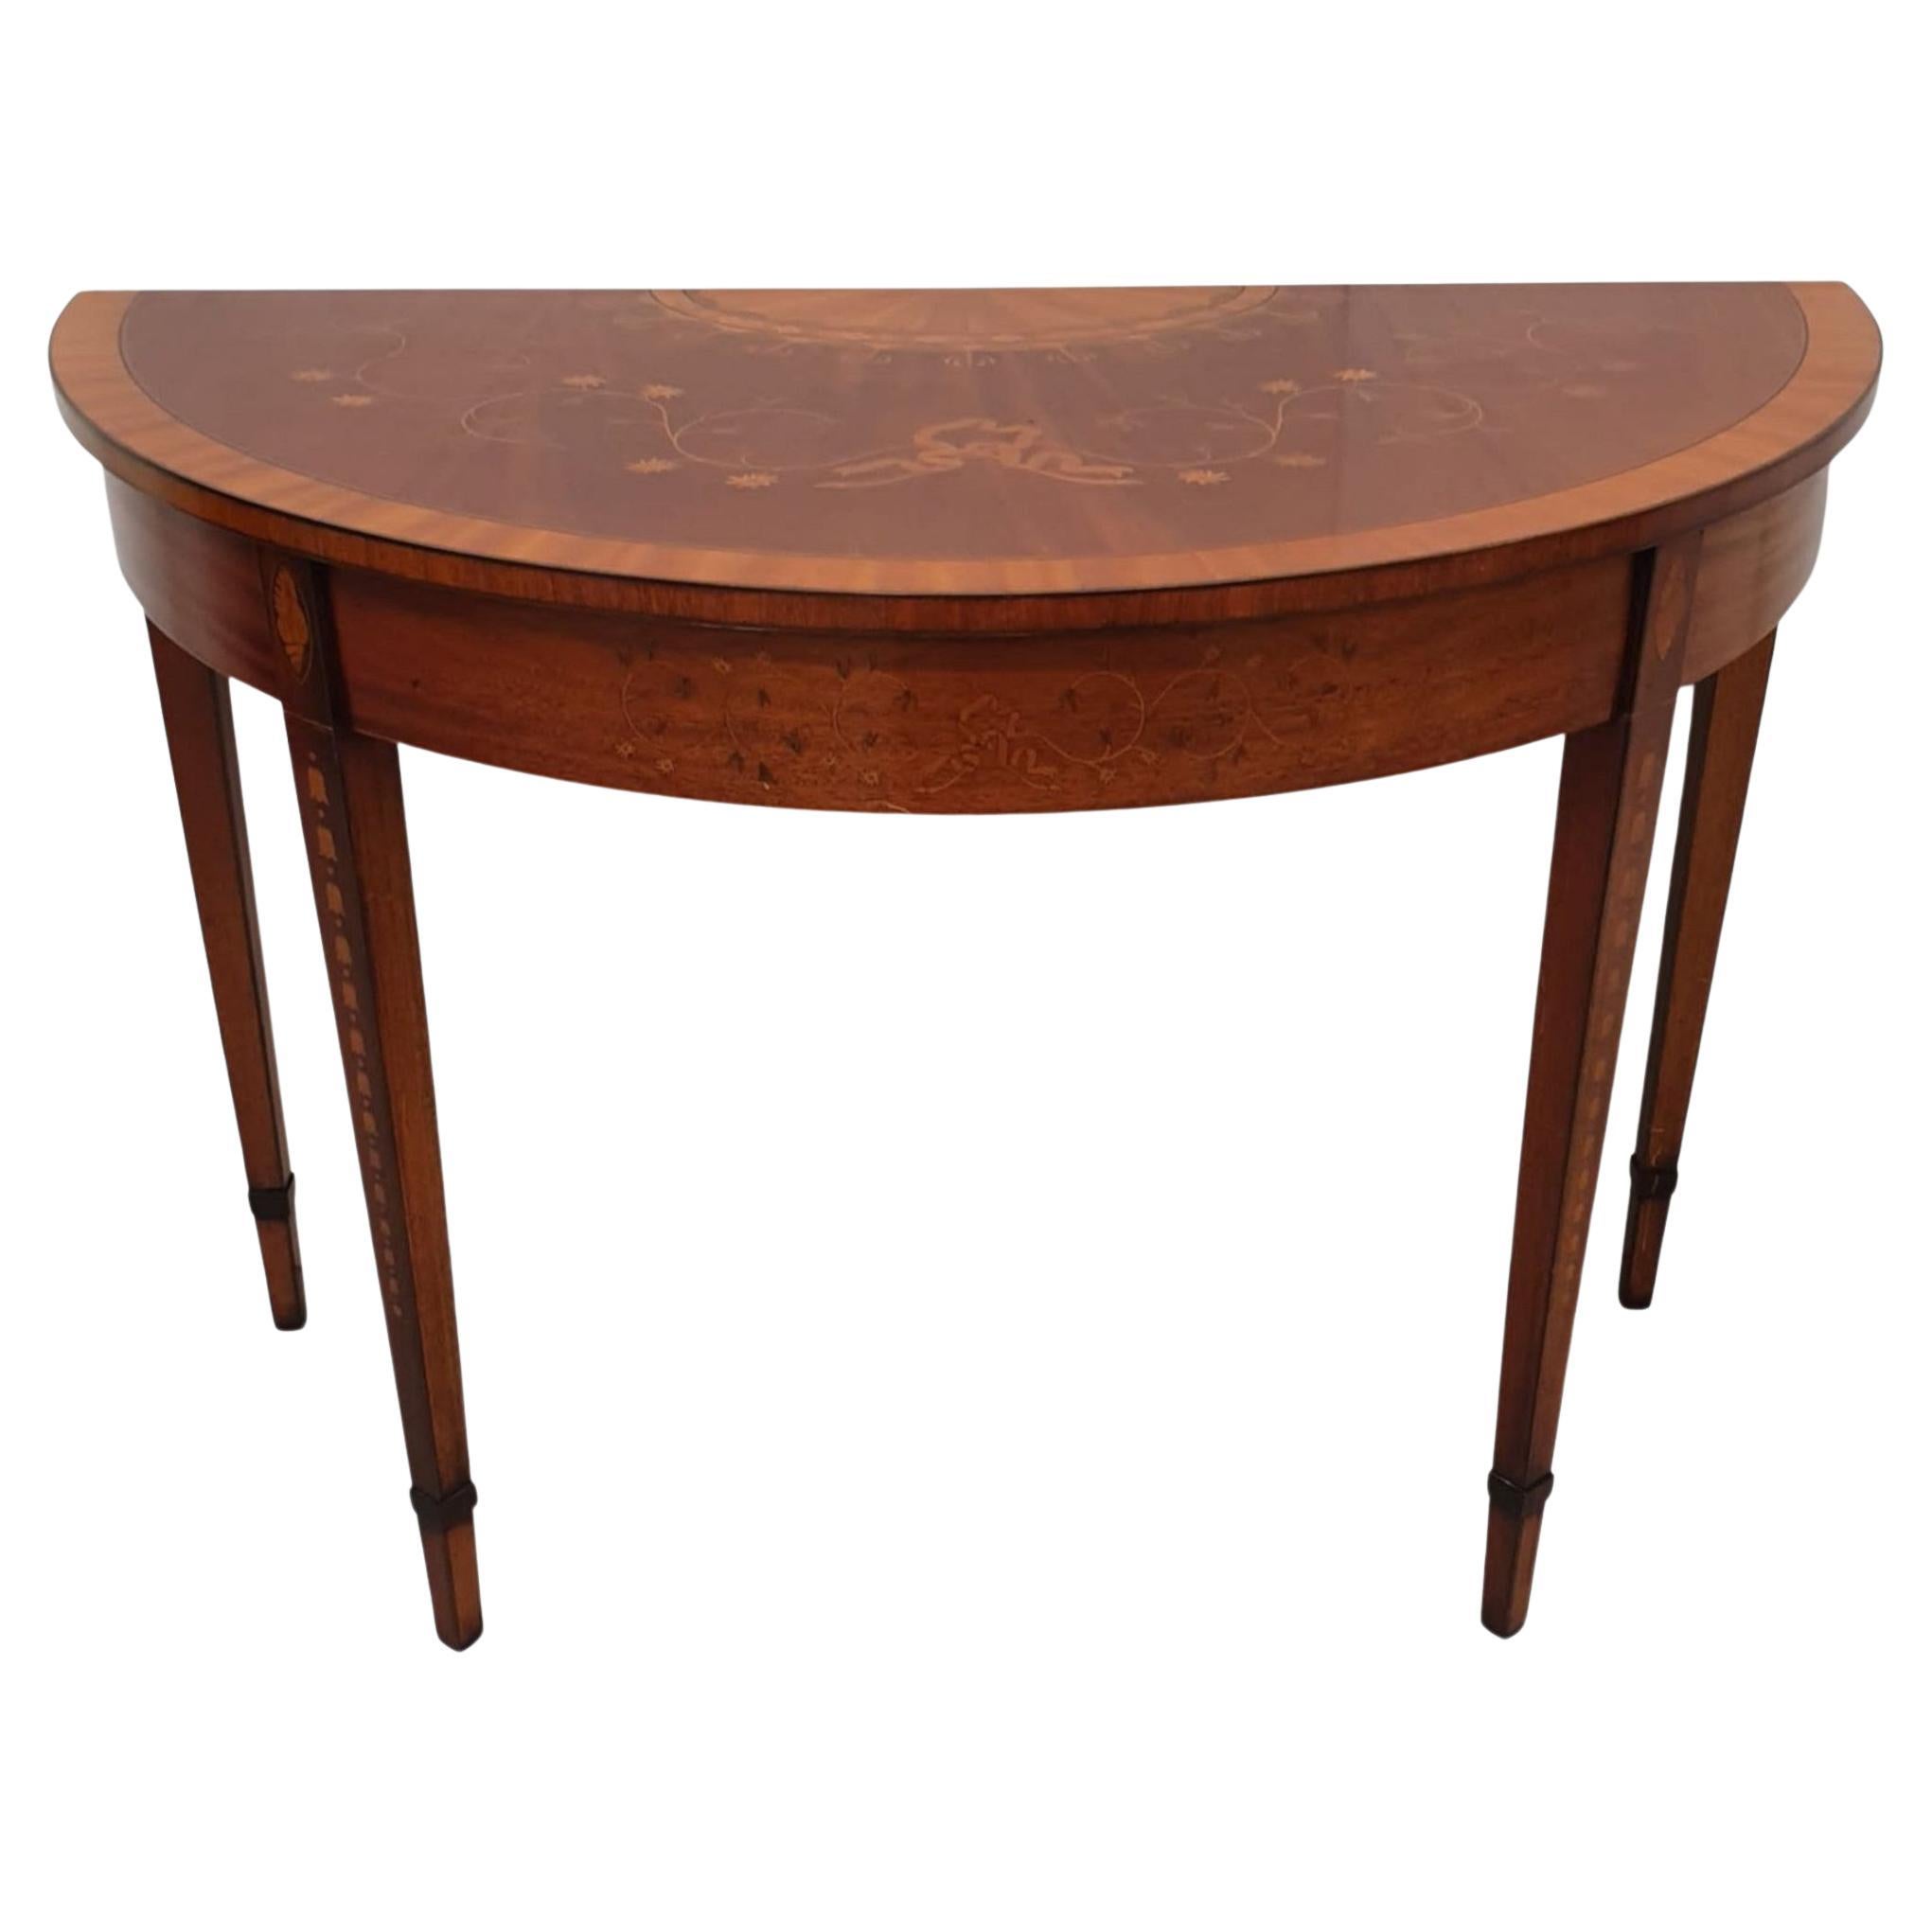 Fabulous Mid-20th Century Inlaid Demi Lune Table For Sale